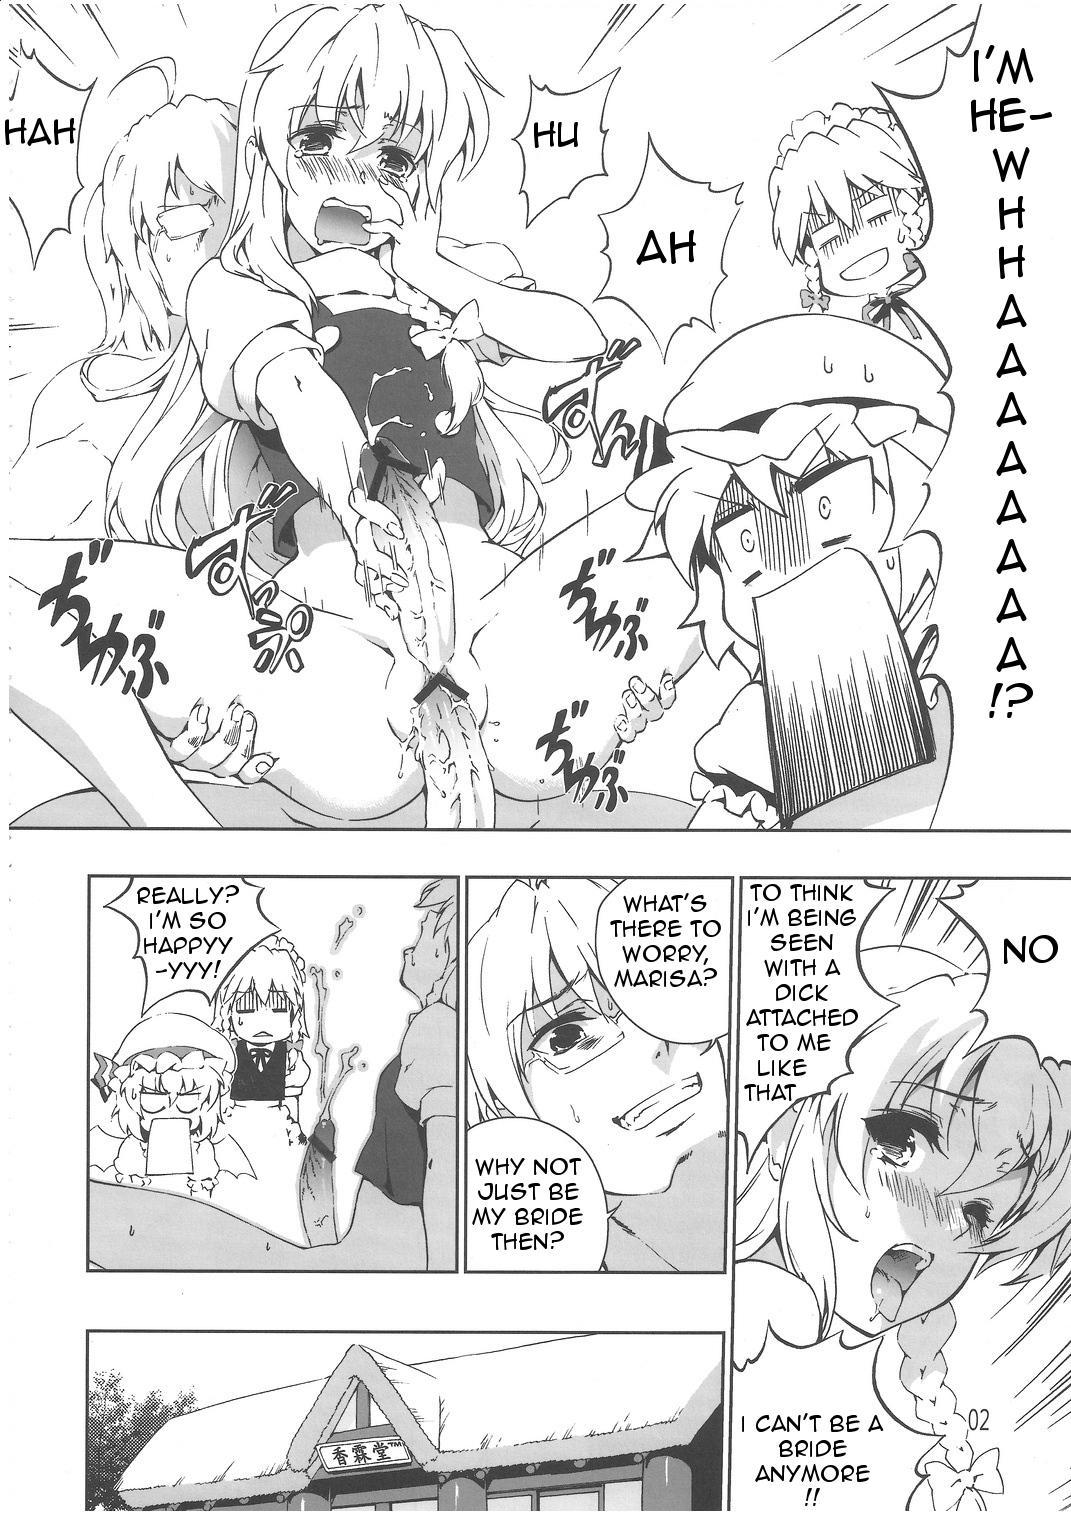 Raw Chinese Kaichuudokei - Touhou project Muscles - Page 3